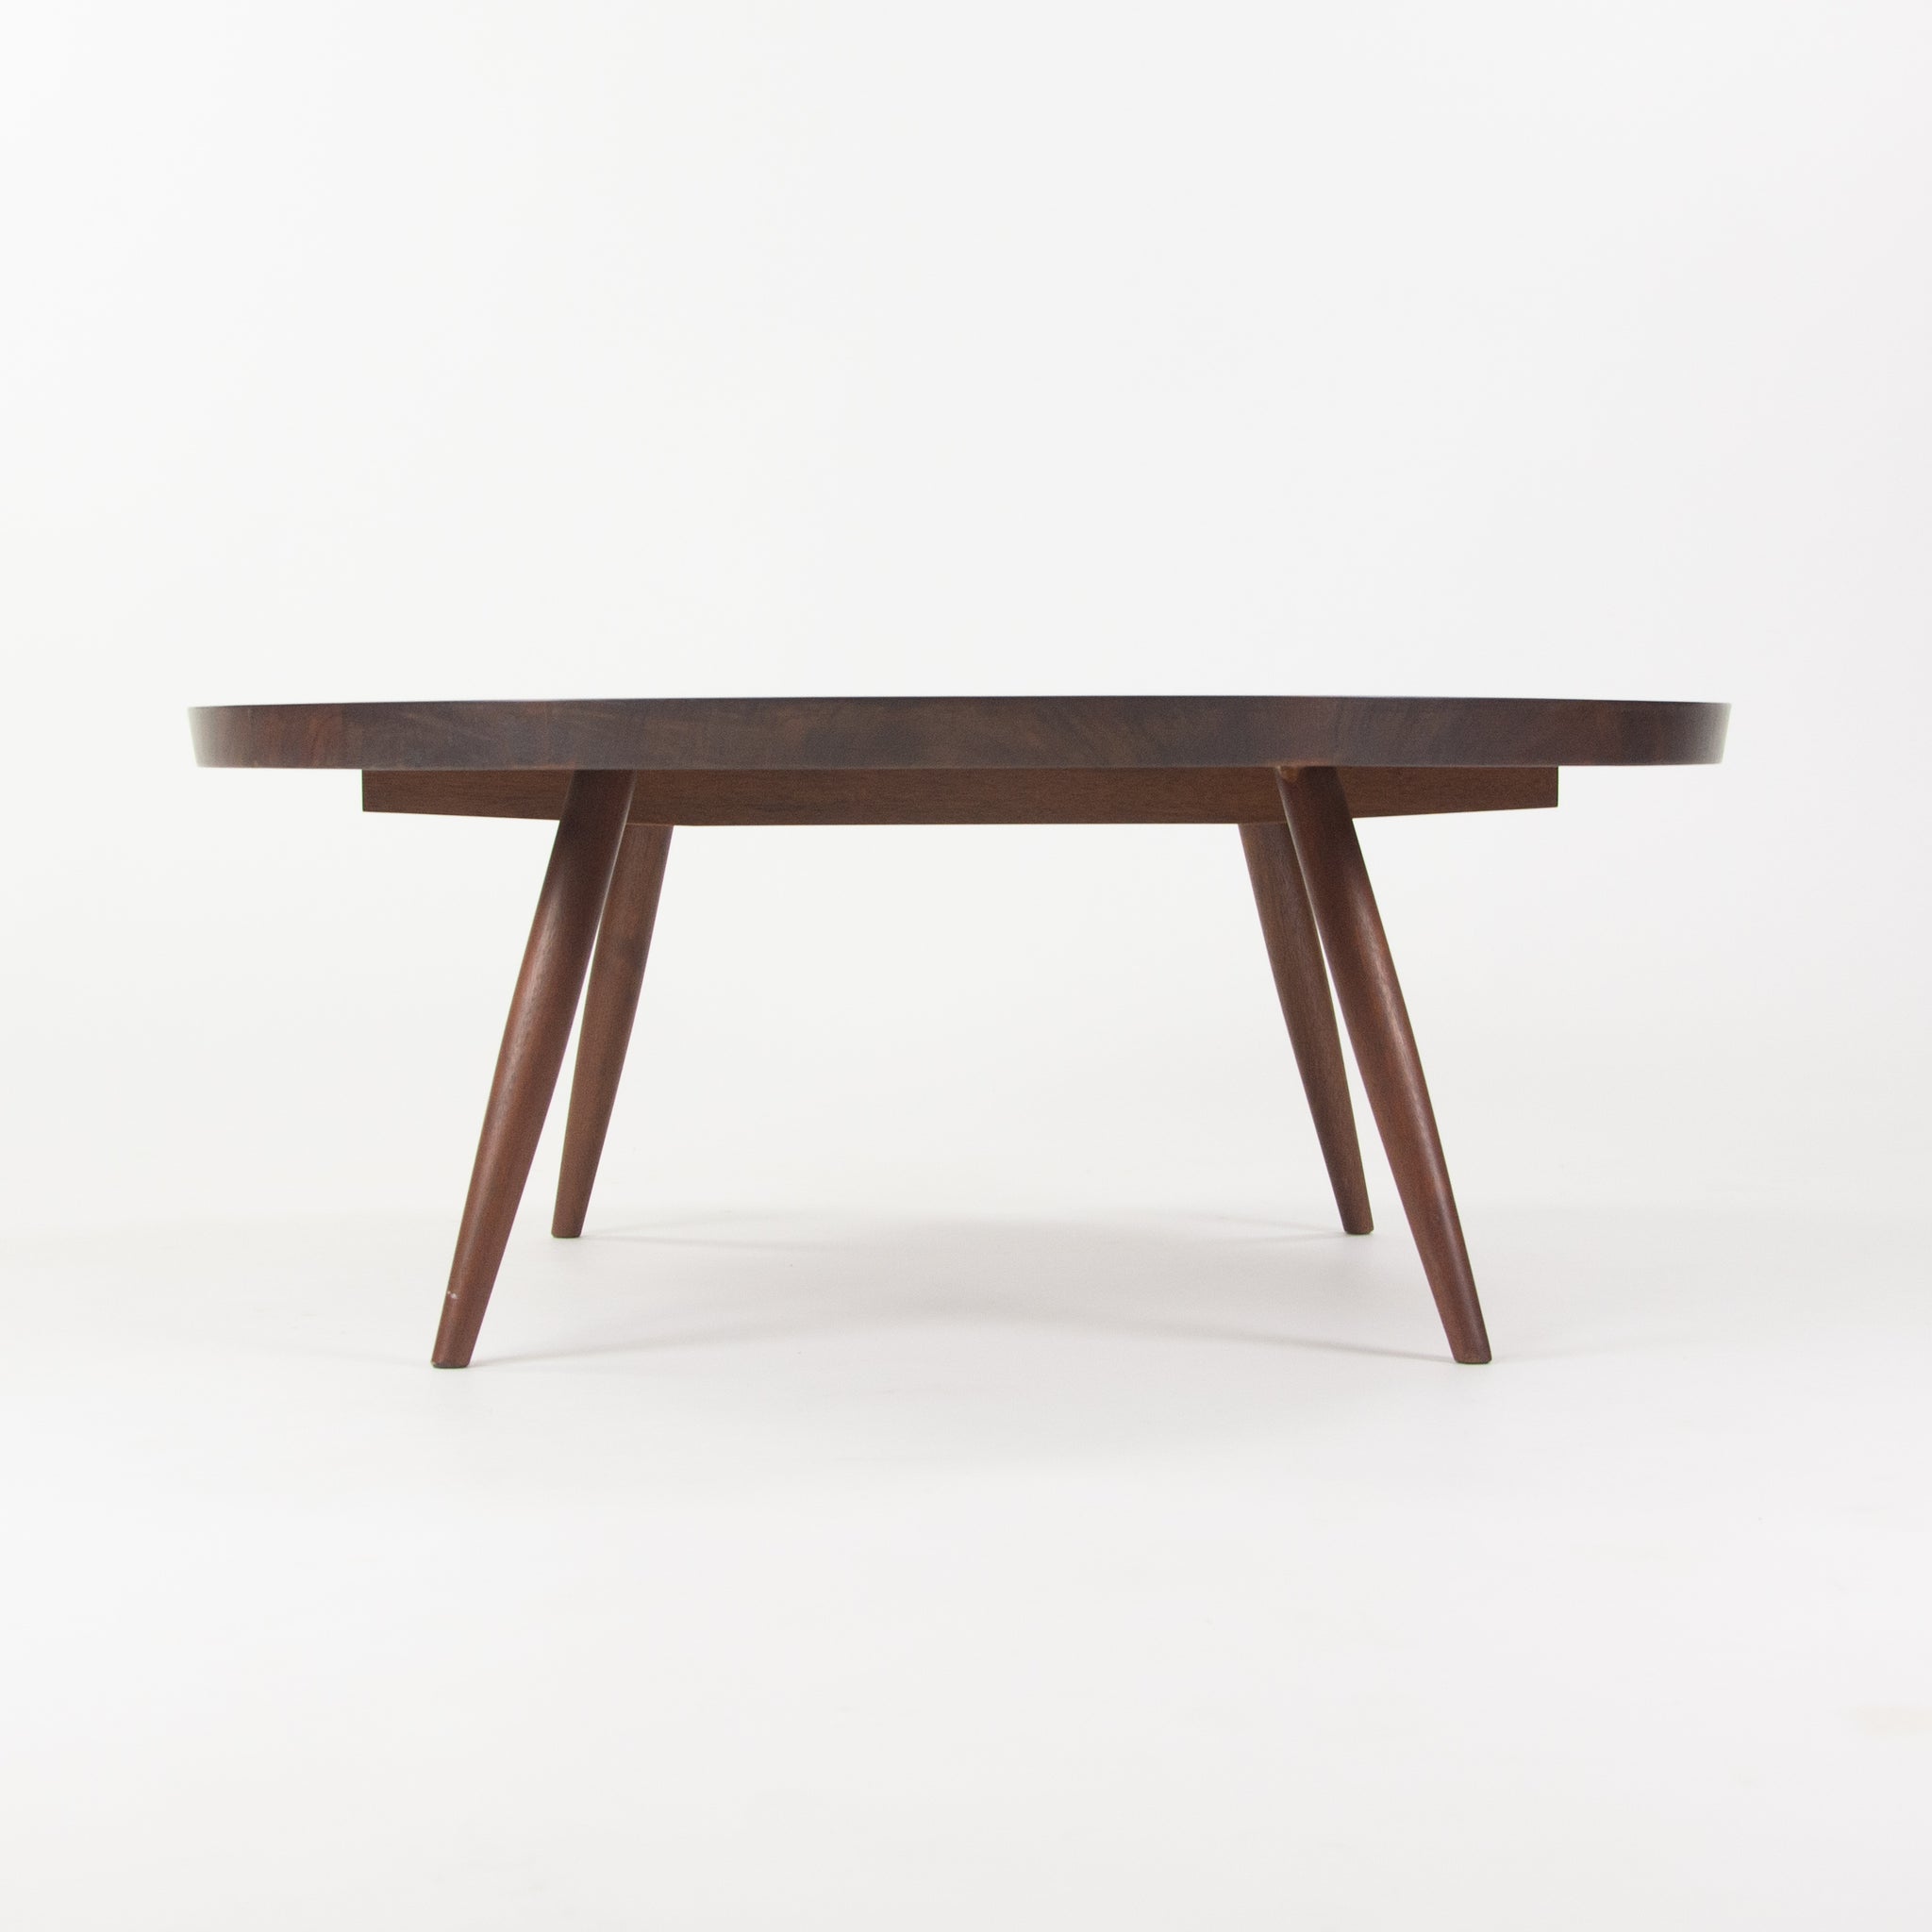 SOLD 1959 George Nakashima 36 inch Round Black Walnut Coffee Table with Provenance